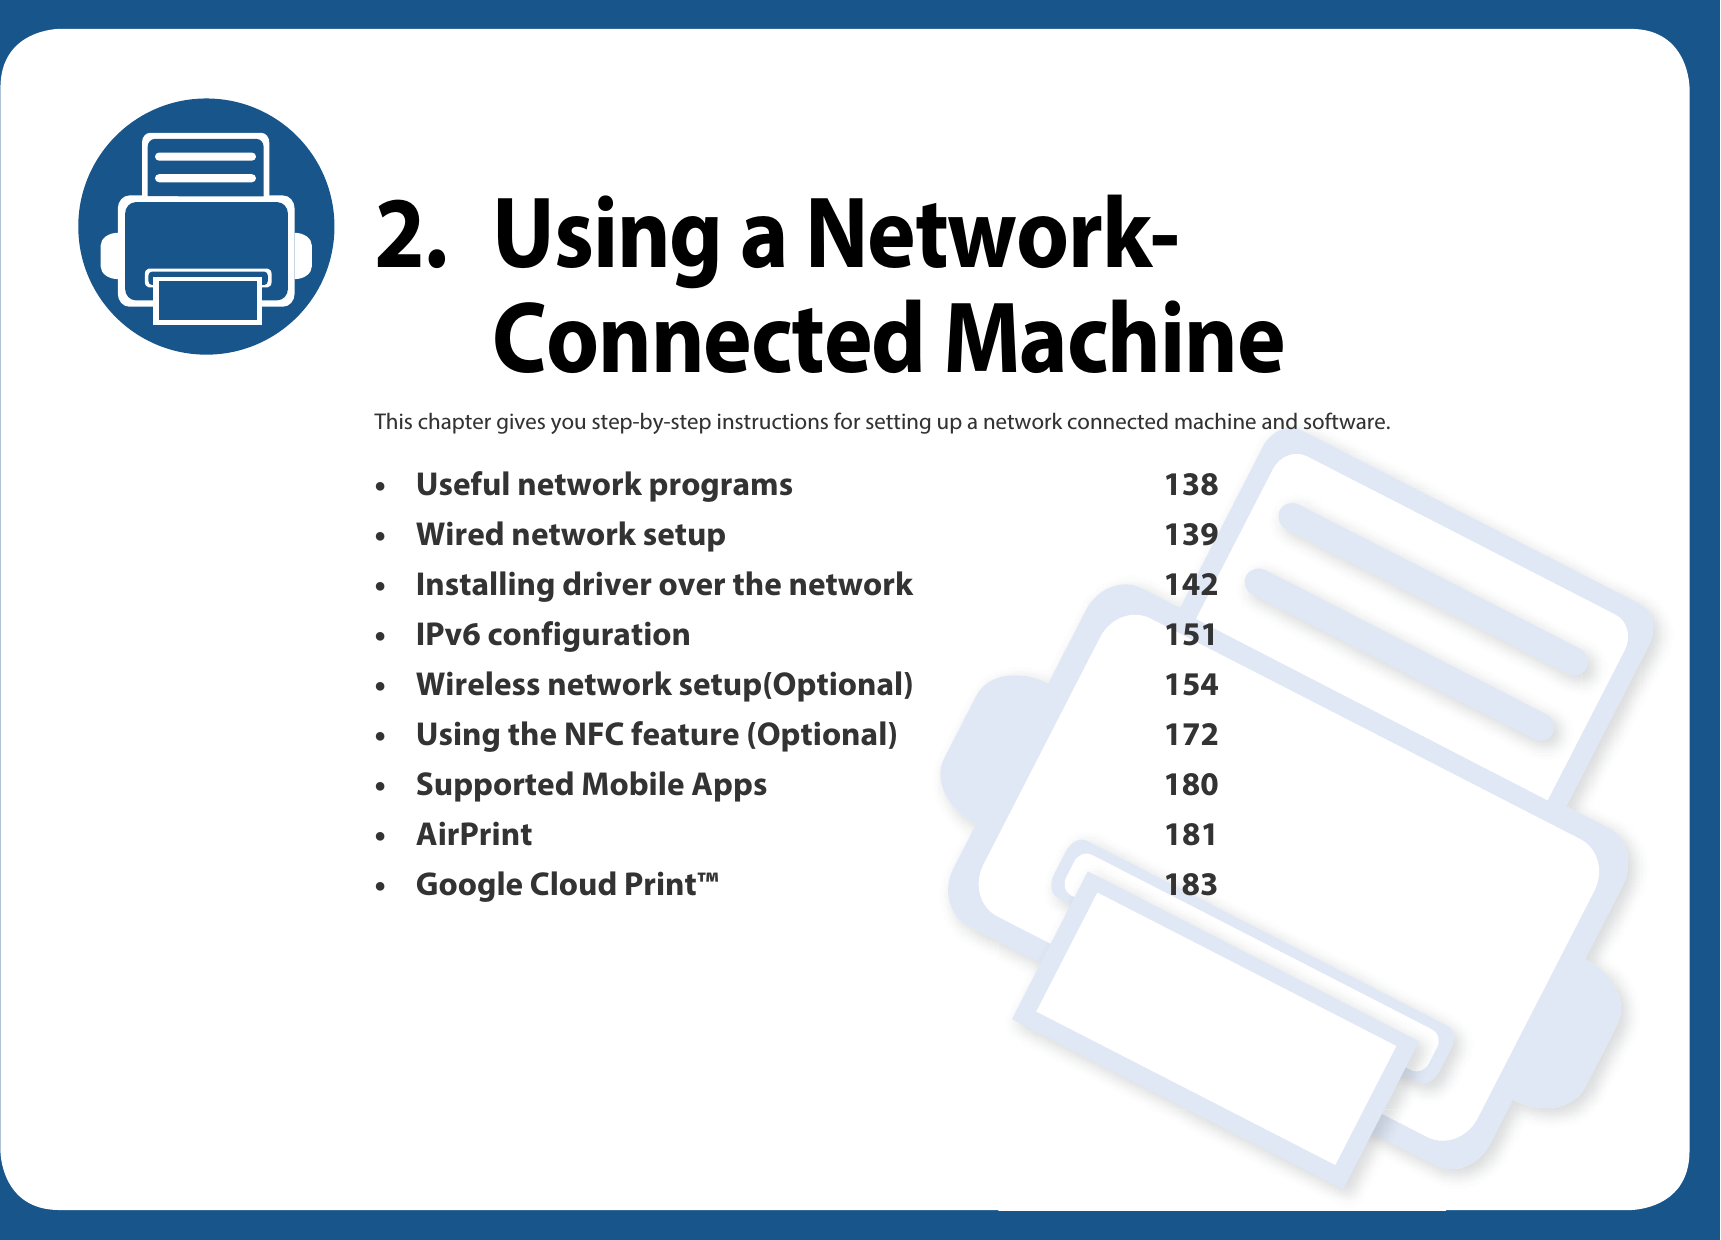 2. Using a Network-Connected MachineThis chapter gives you step-by-step instructions for setting up a network connected machine and software.• Useful network programs 138• Wired network setup 139• Installing driver over the network 142• IPv6 configuration 151• Wireless network setup(Optional) 154• Using the NFC feature (Optional) 172• Supported Mobile Apps 180• AirPrint 181• Google Cloud Print™ 183